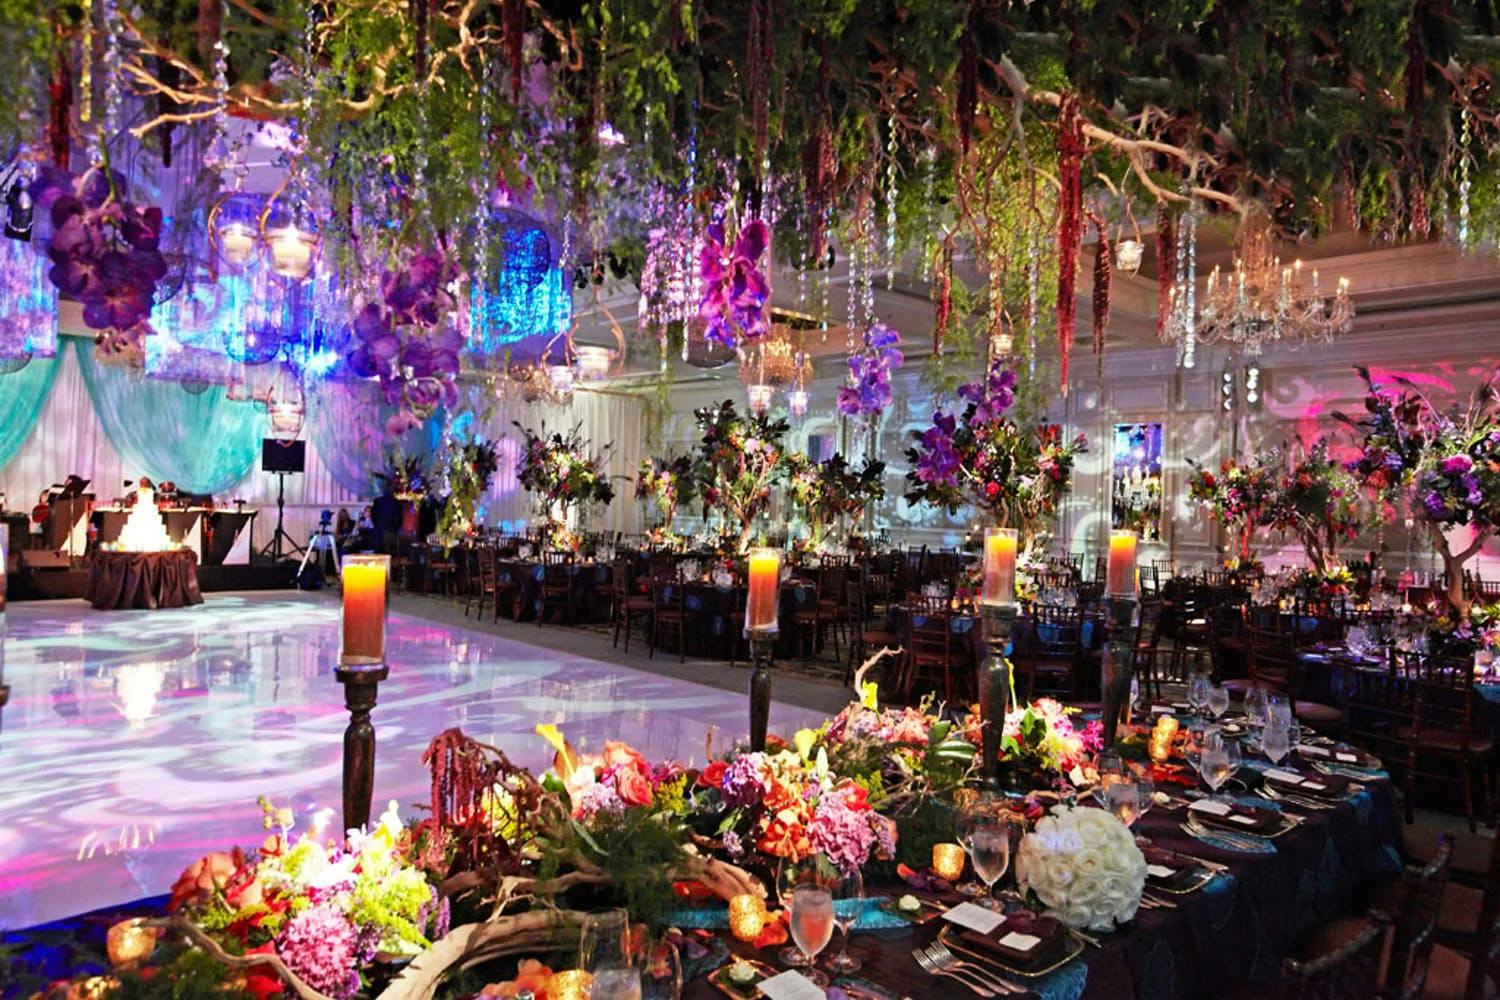 Colorful wedding colors and bright décor at Four Seasons Hotel Chicago | PartySlate